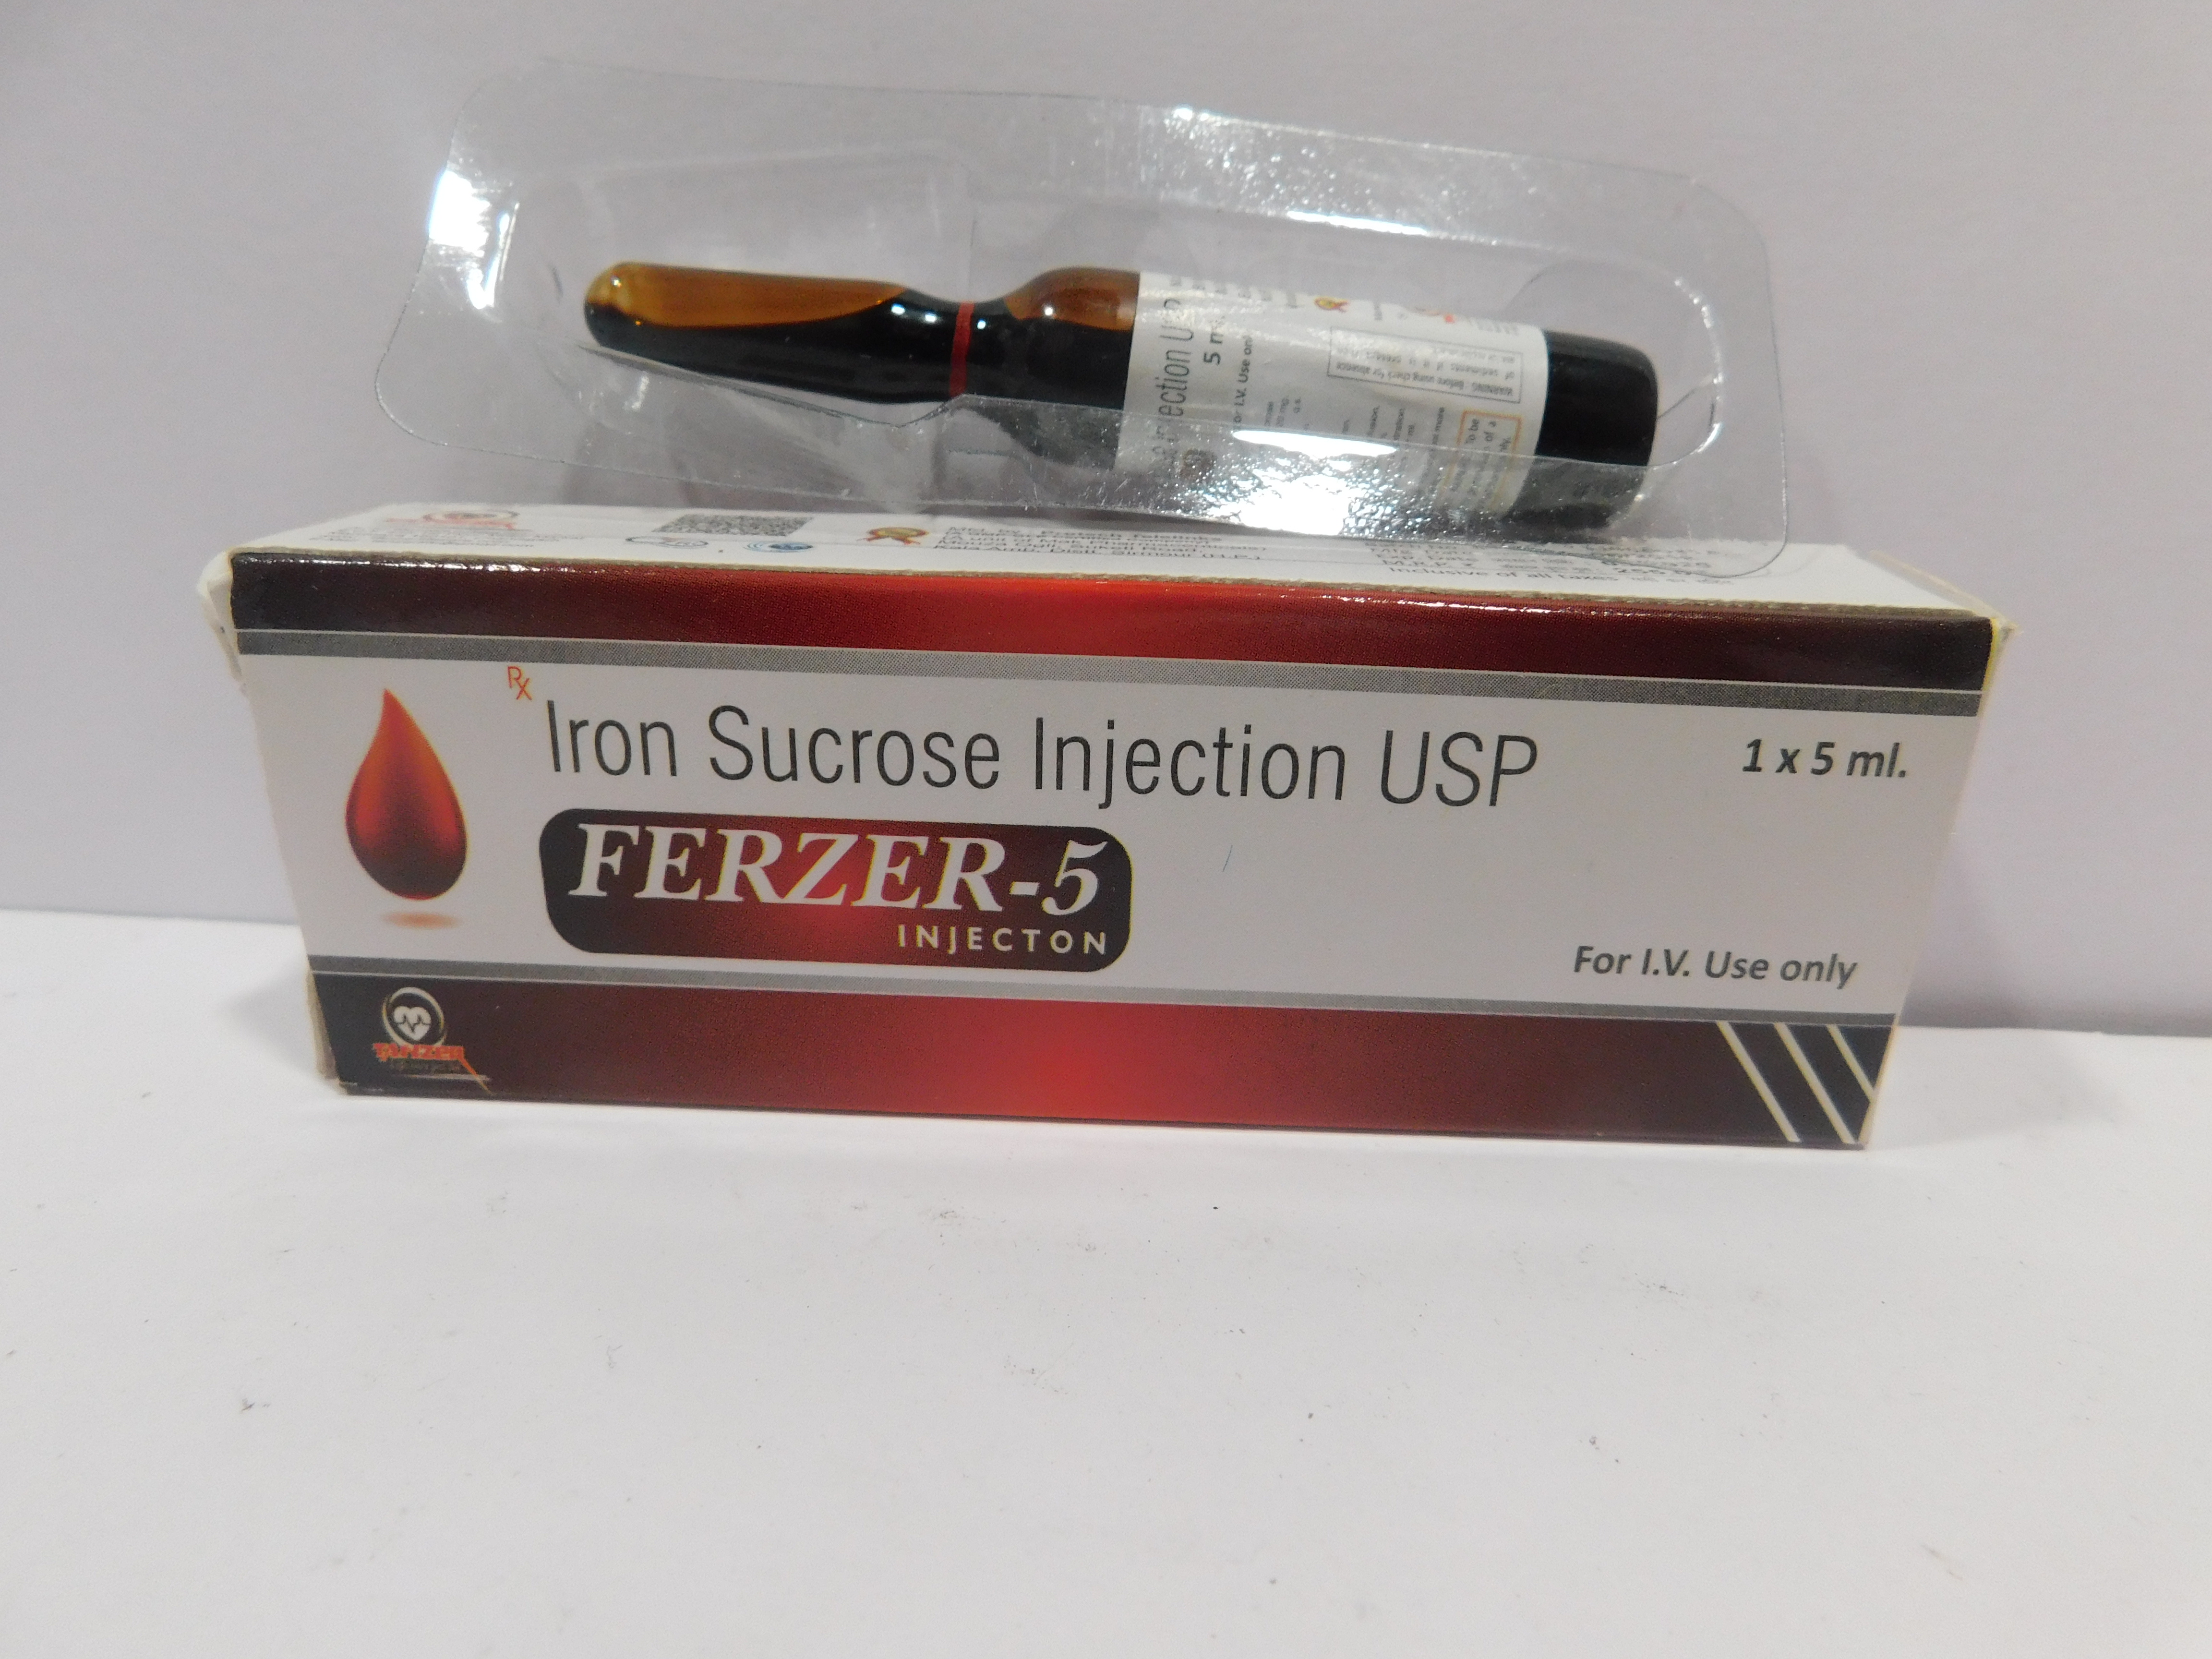 Product Name: FERZER 5, Compositions of FERZER 5 are Iron Sucros Injection USP - Tanzer Lifecare Private Limited